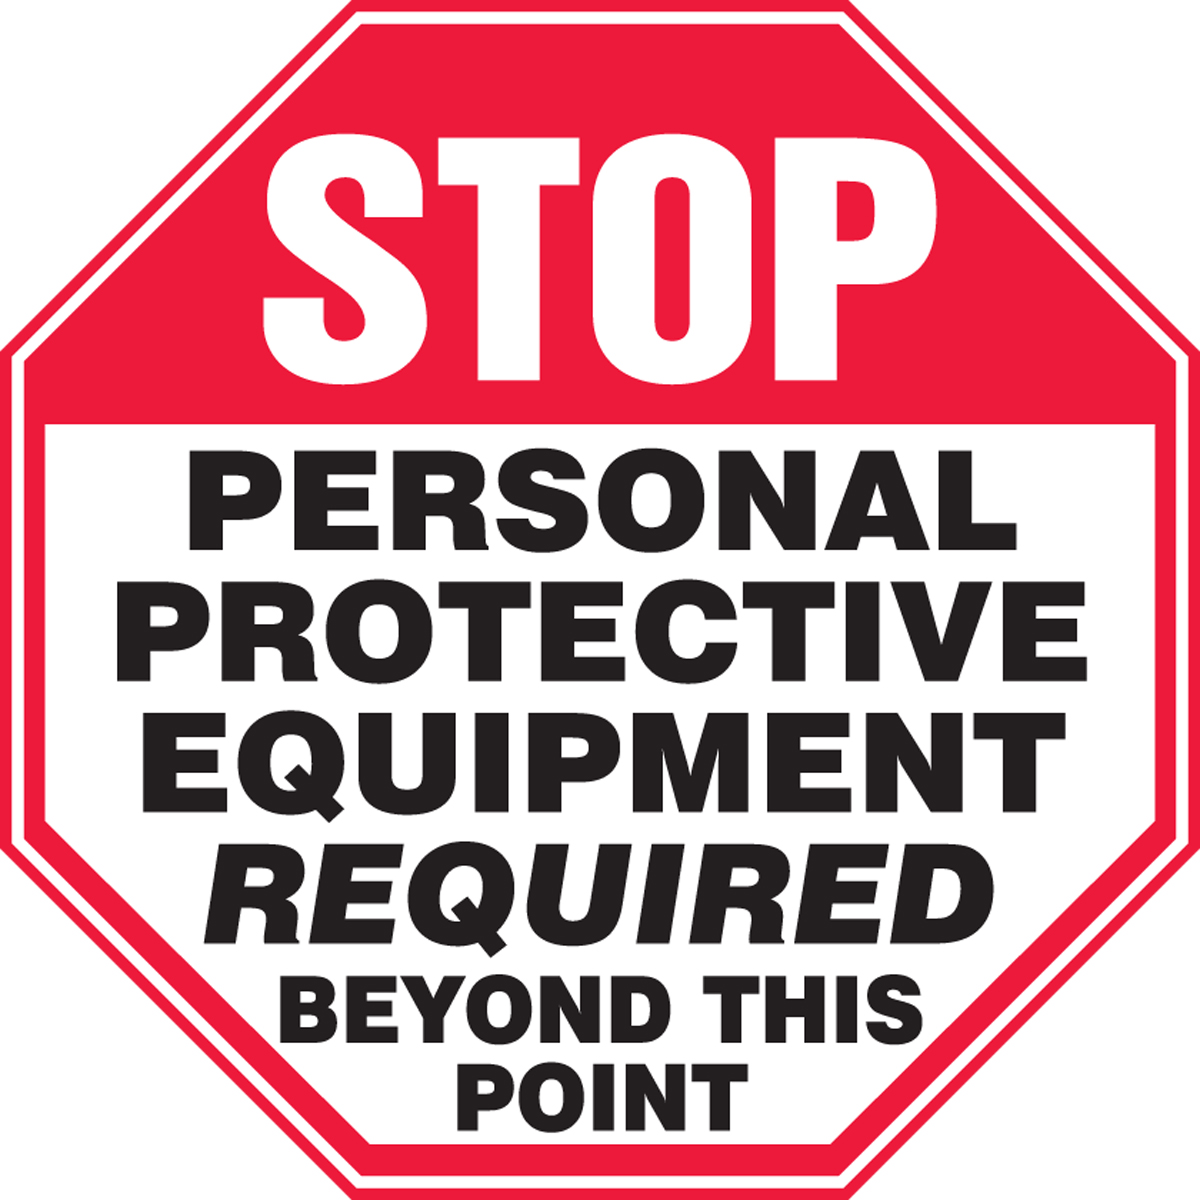 STOP PERSONAL PROTECTIVE EQUIPMENT REQUIRED BEYOND THIS POINT